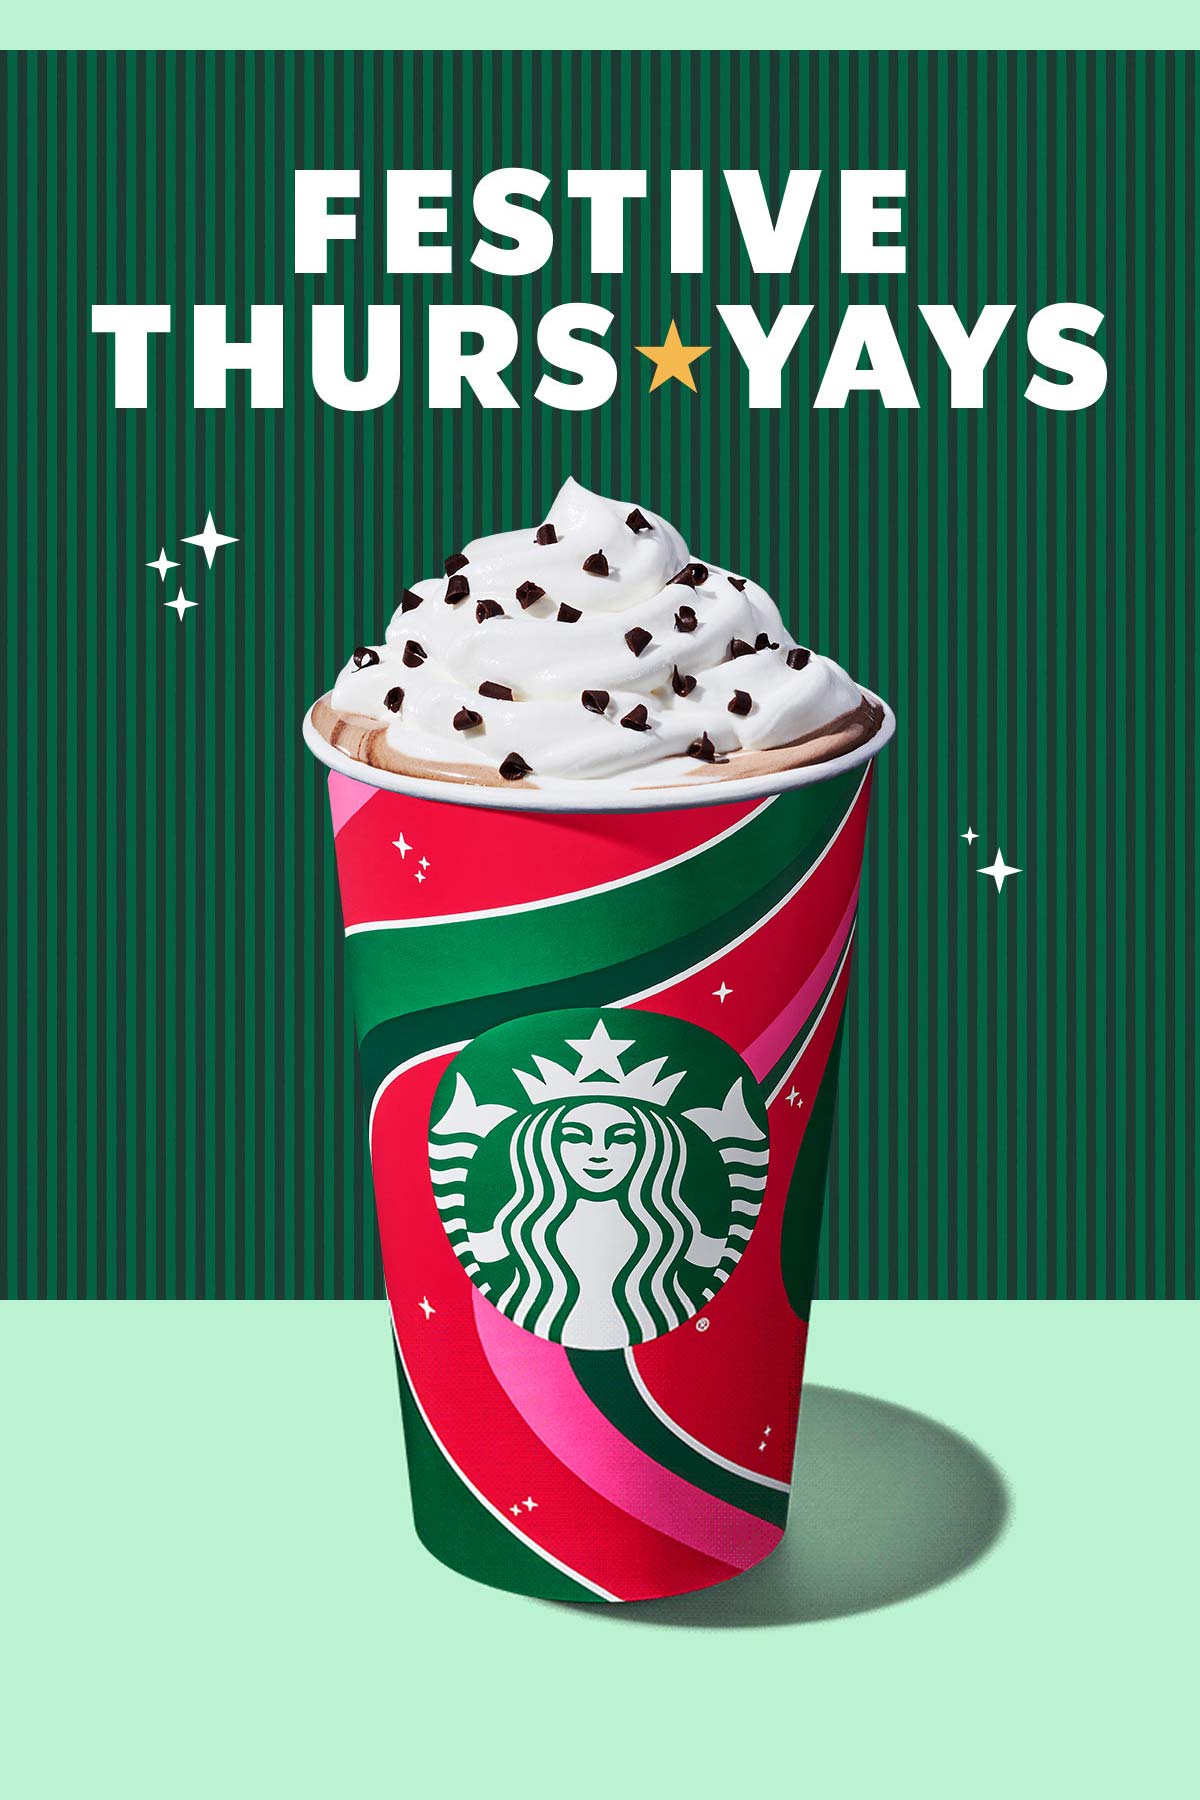 Starbucks Festive Thuesyays text with hot drink on a green background.